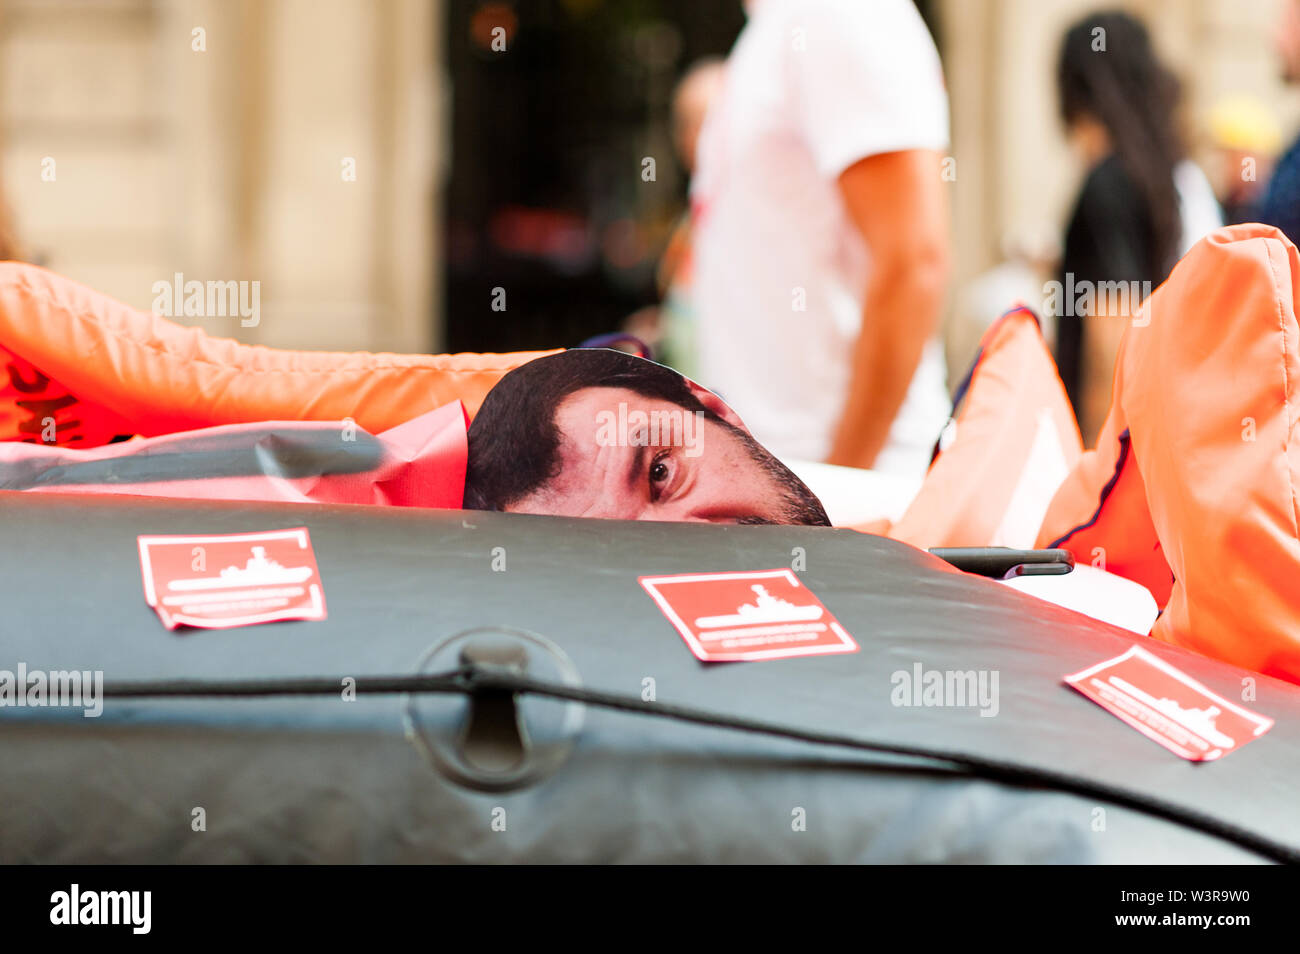 Barcelona, spain- 17 july 2019: mask of salvini face  drowning inside rubber dinghy with life belts and proactiva open arms stickers as a symbol of mi Stock Photo